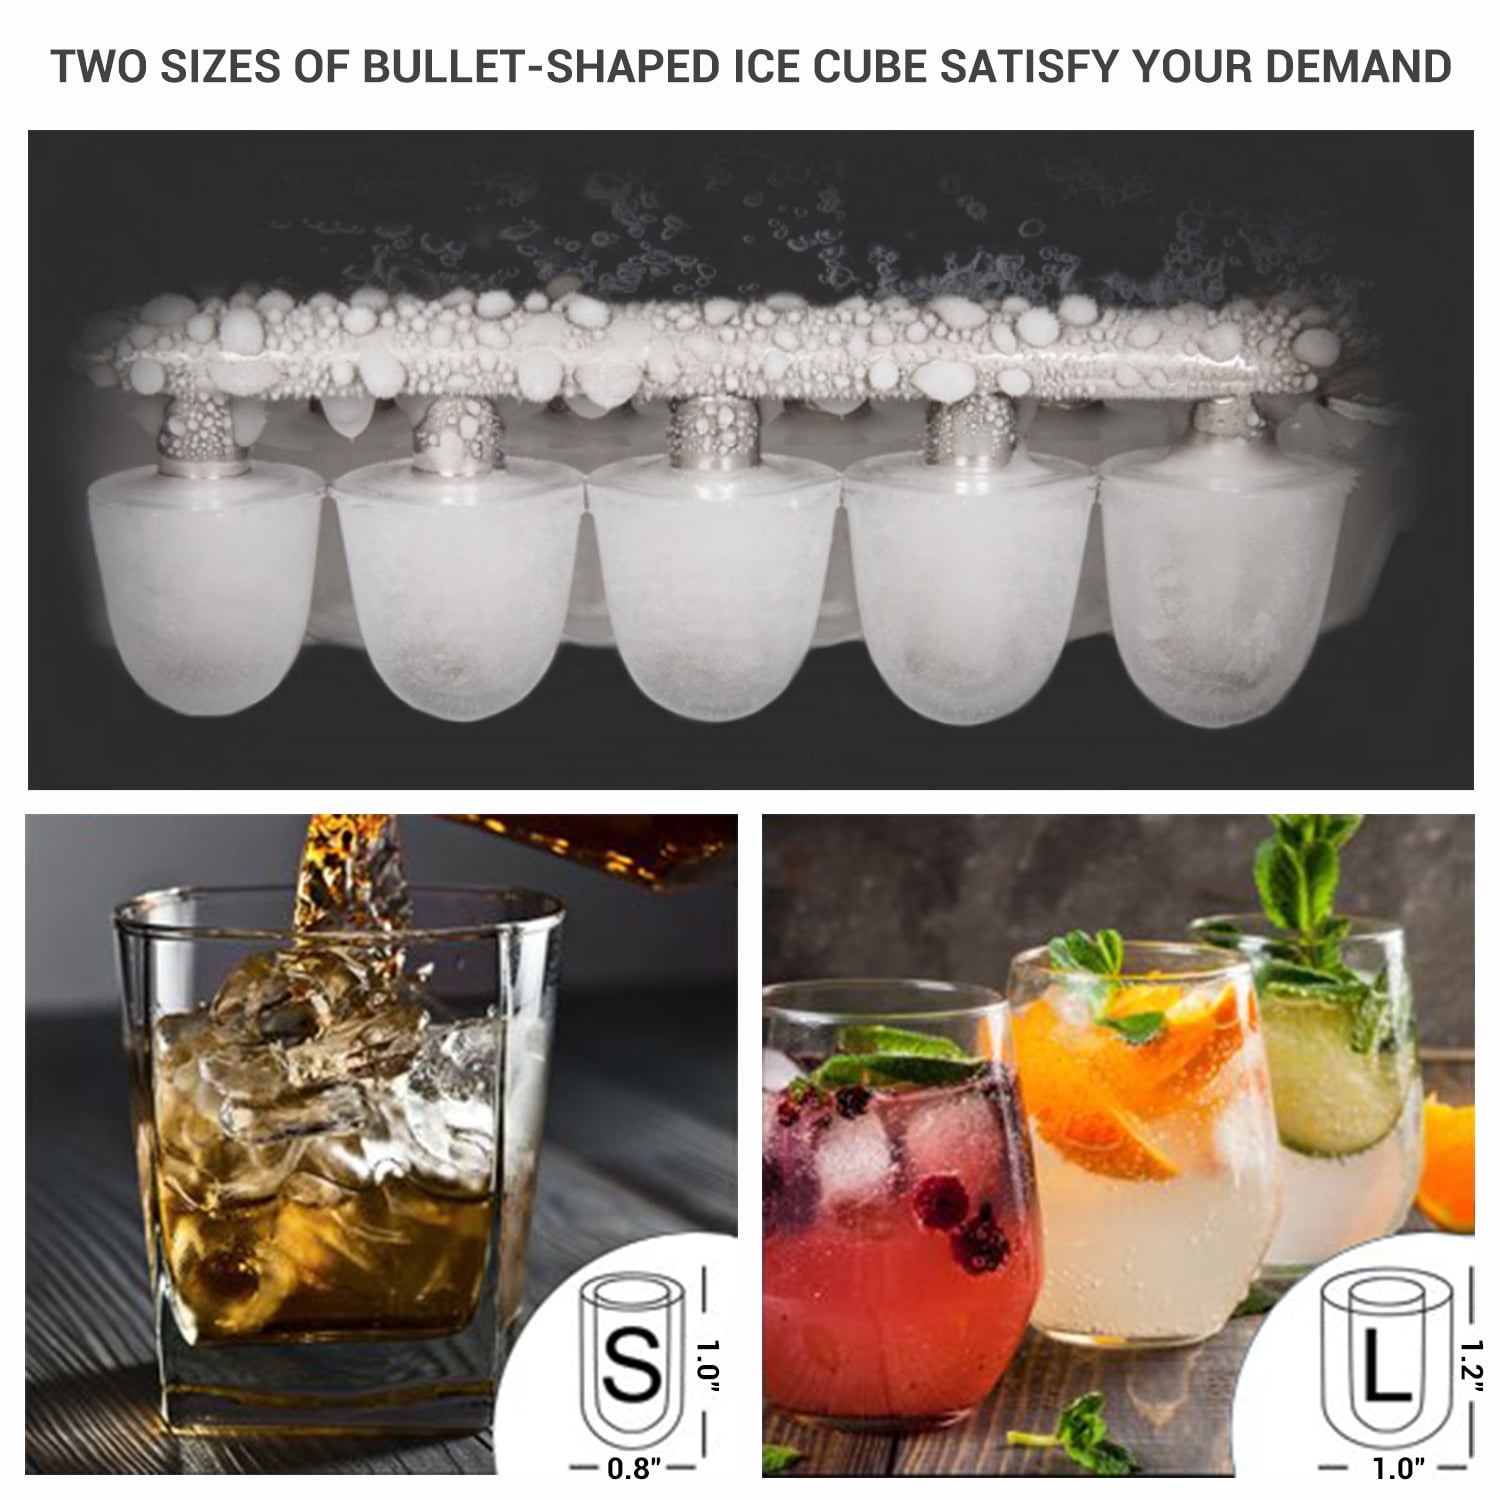 Square Ice Cubes - Enjoy Big 2 Inch Square-Sided Ice Every Day! - Goliath  Ice